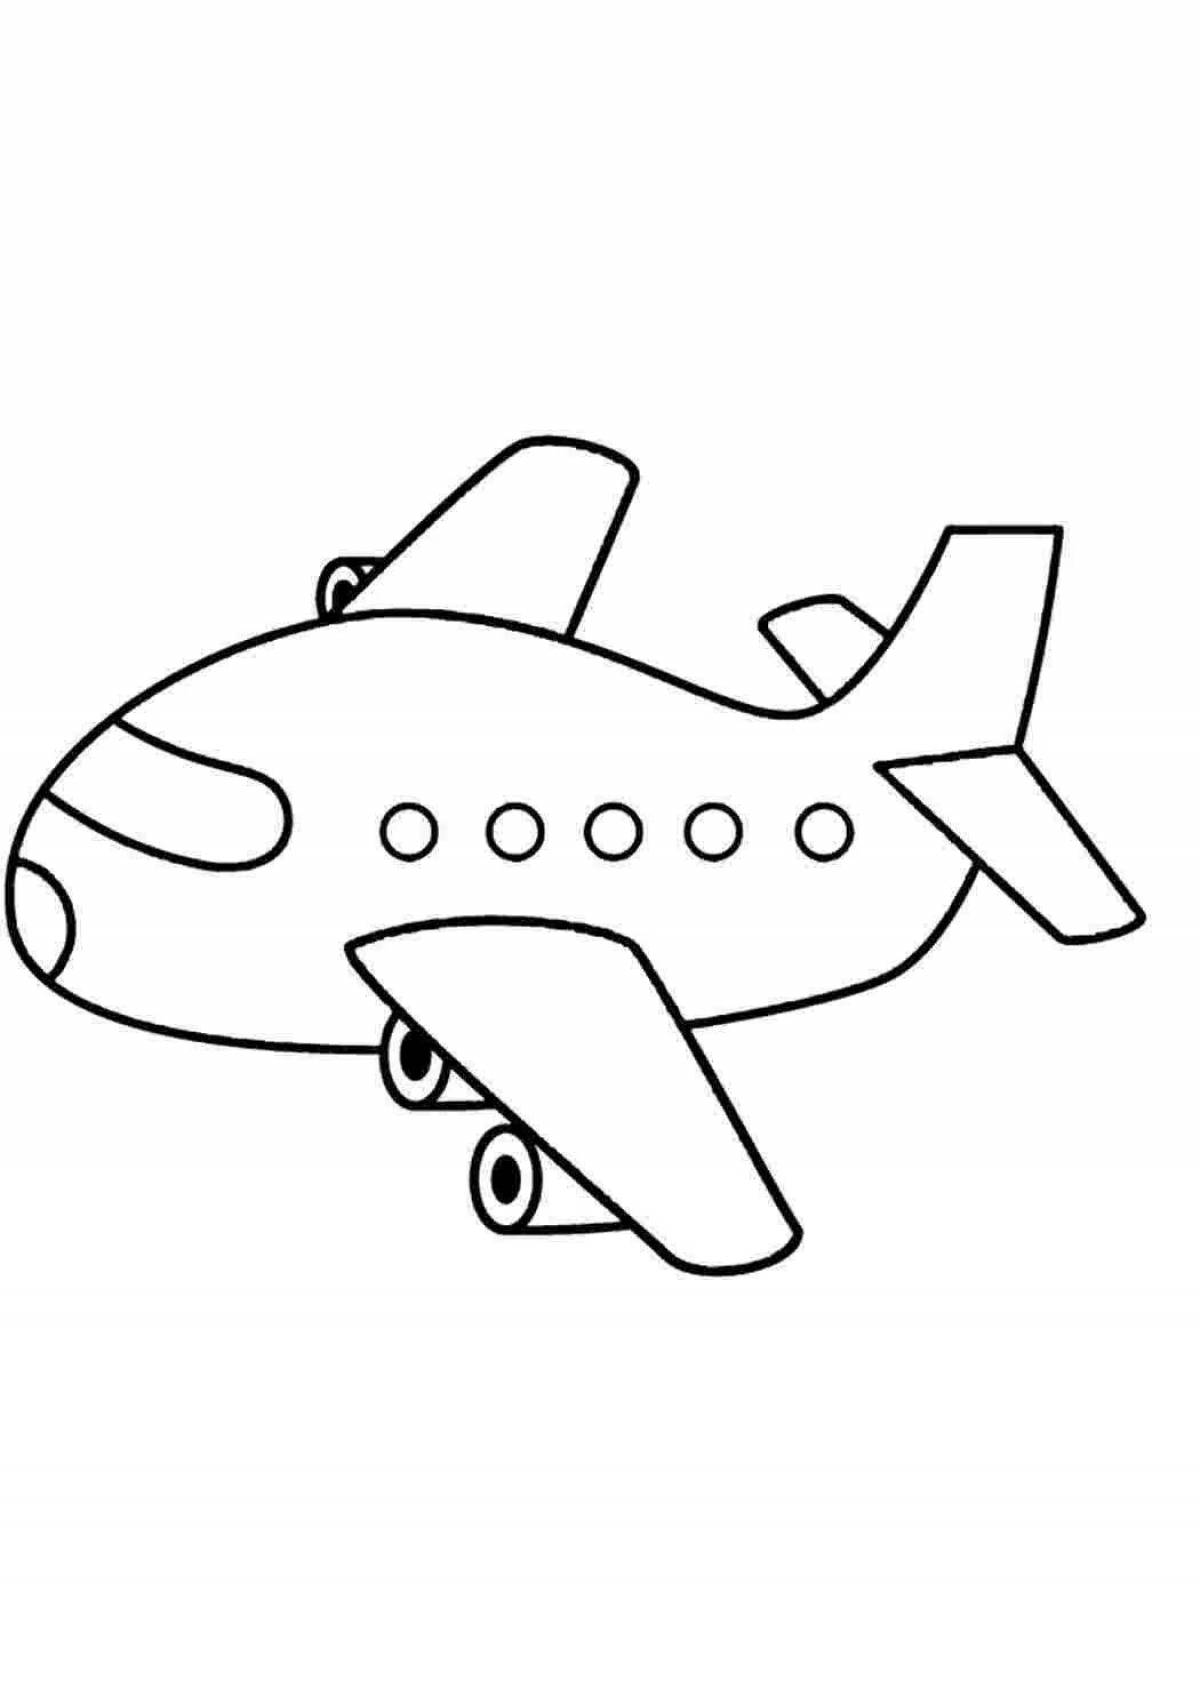 Exciting airplane coloring page for kids